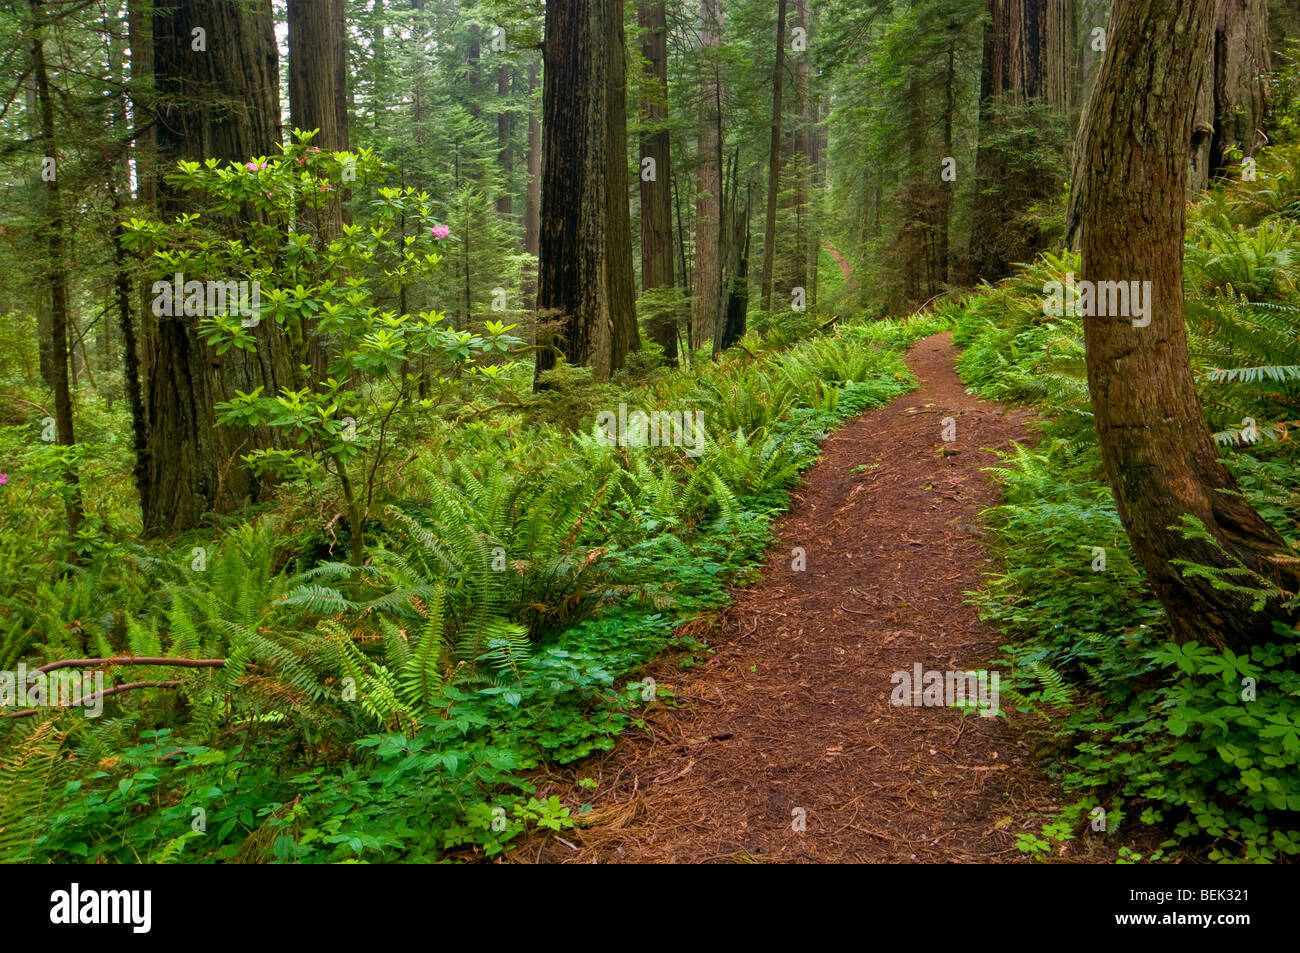 Trail through redwood trees and forest, Del Norte Coast Redwood State Park, California Stock Photo